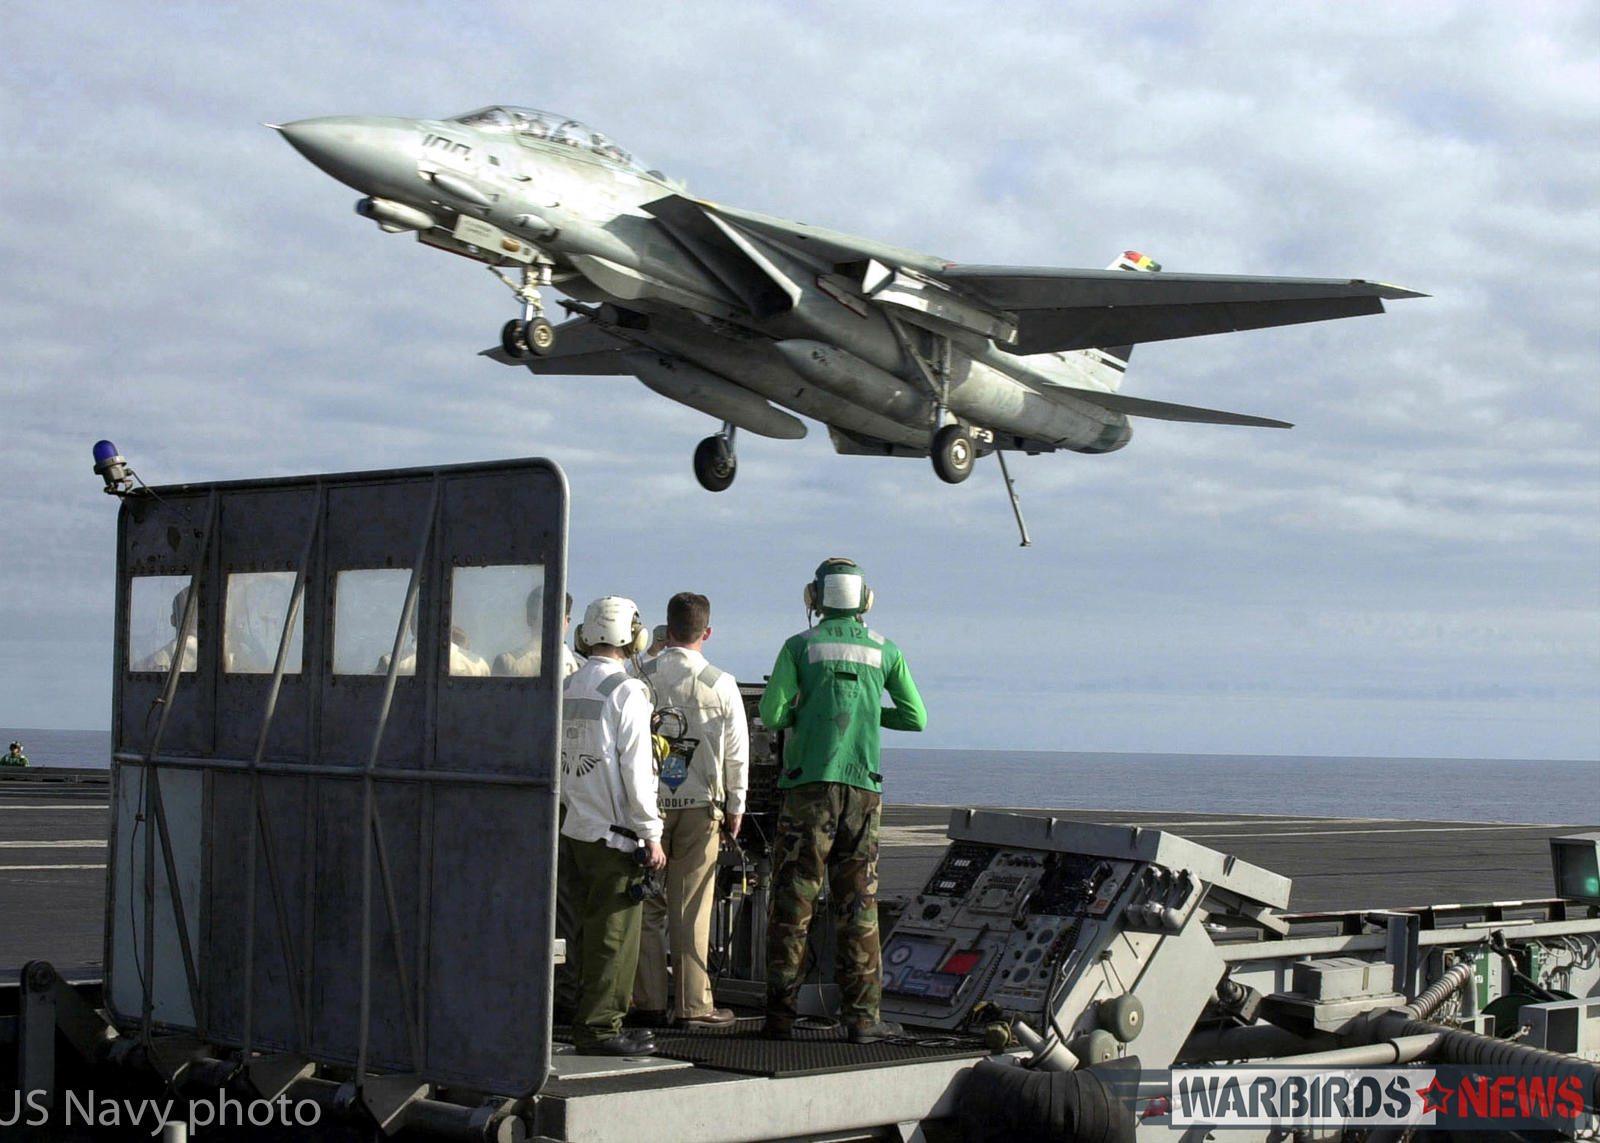 Aboard USS Abraham Lincoln (Jan. 26, 2001) -- An F-14D "Tomcat" from the "Tomcatters" of Fighter Squadron Three One (VF-31) flies over the Landing Signal Officer (LSO) platform aboard USS Abraham Lincoln (CVN 72) after returning from a successful proficiency flight. The Lincoln is on her final leg of a scheduled six-month deployment to the Arabian Gulf in support of Operation Southern Watch. U.S. Navy photo by Photographer's Mate 2nd Class Daniel Wolsey. (RELEASED)